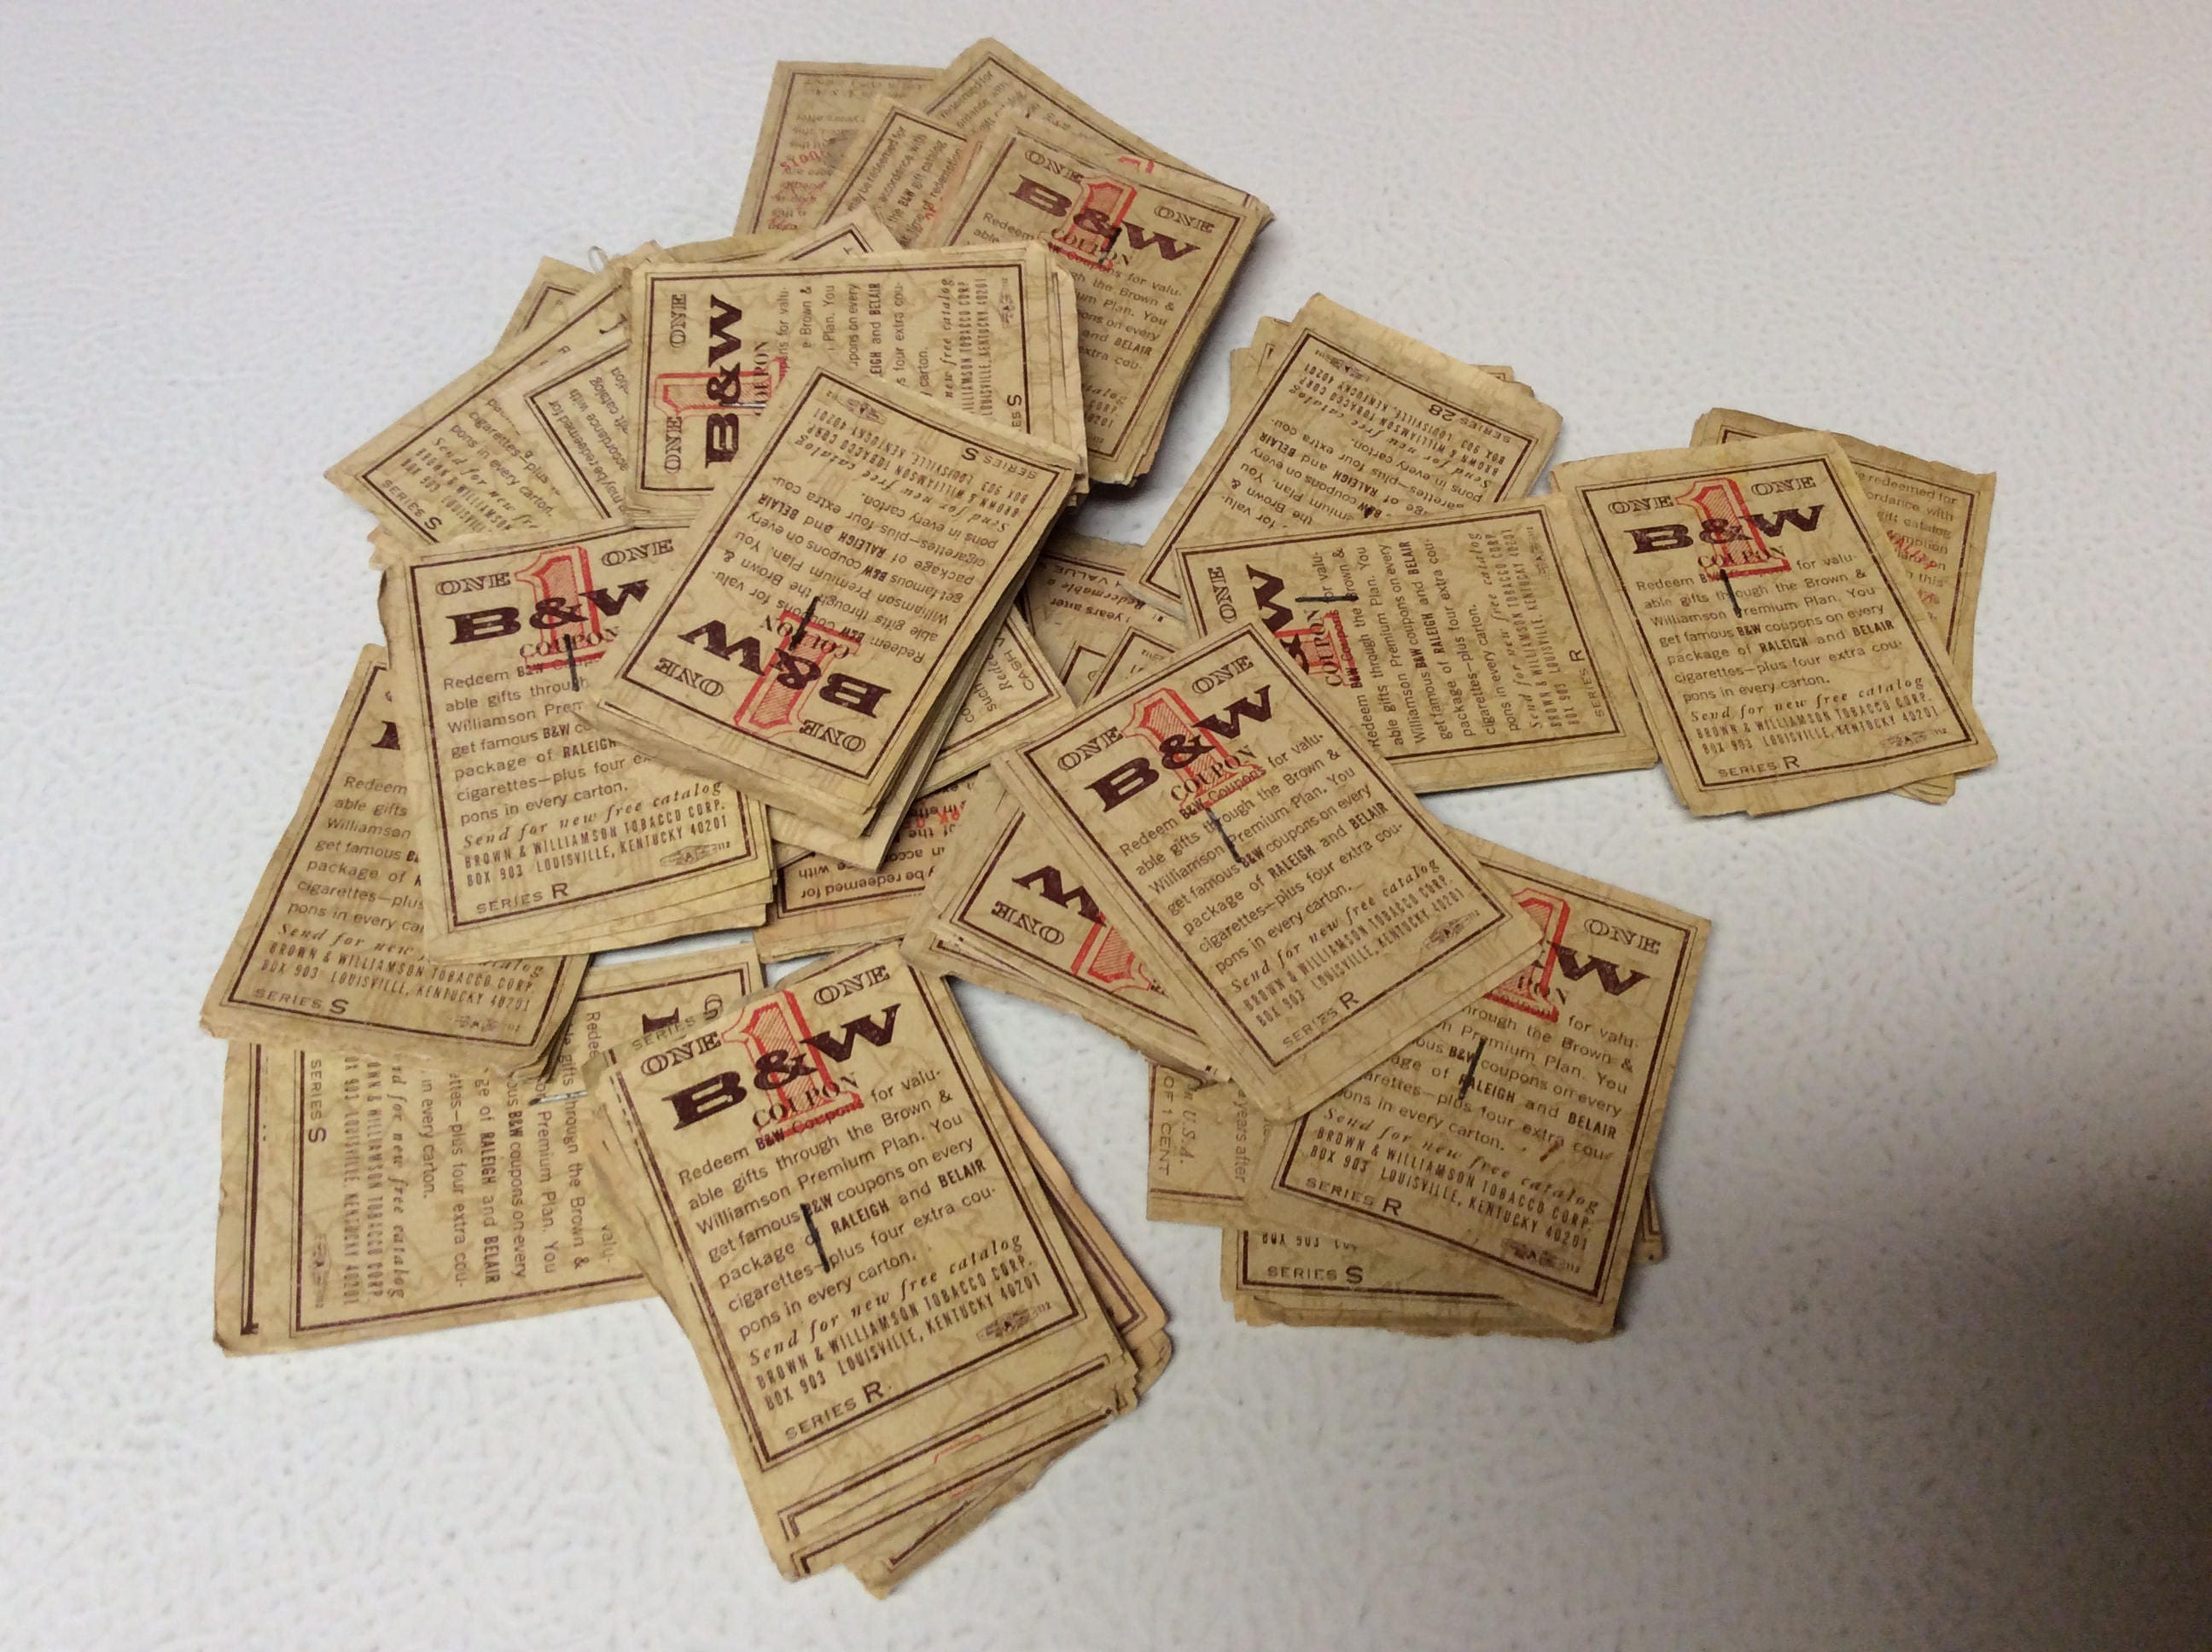 Vintage Raleigh Tobacco Pipe Cleaners and 1956 Coupon Book 